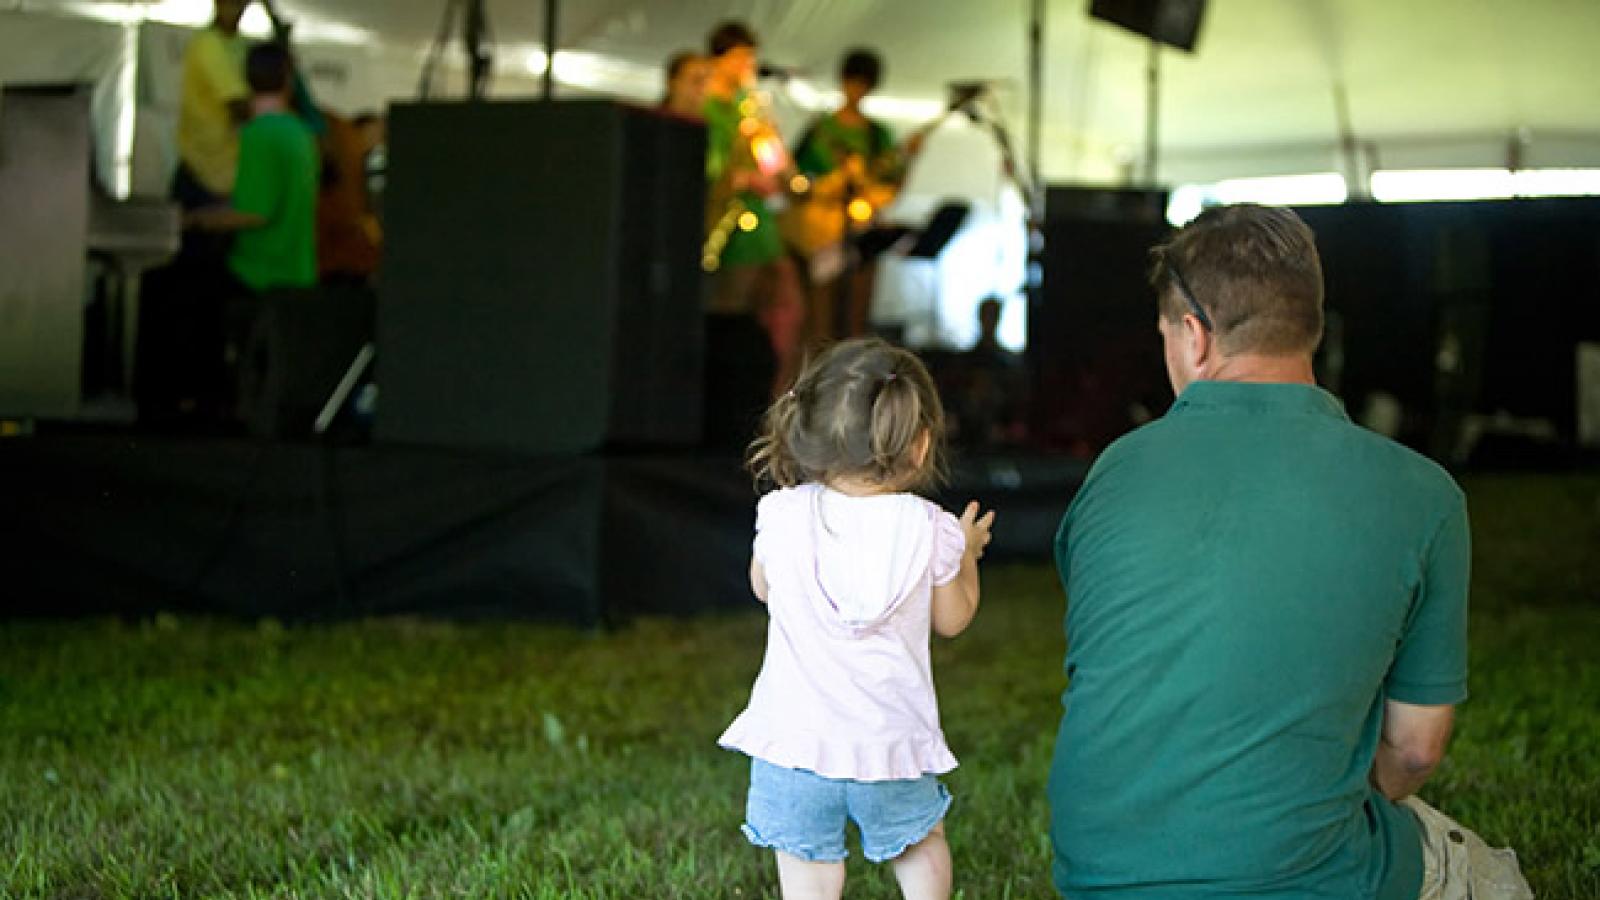 A toddler girl standing in the grass next to her sitting father as they watch an outdoor performance